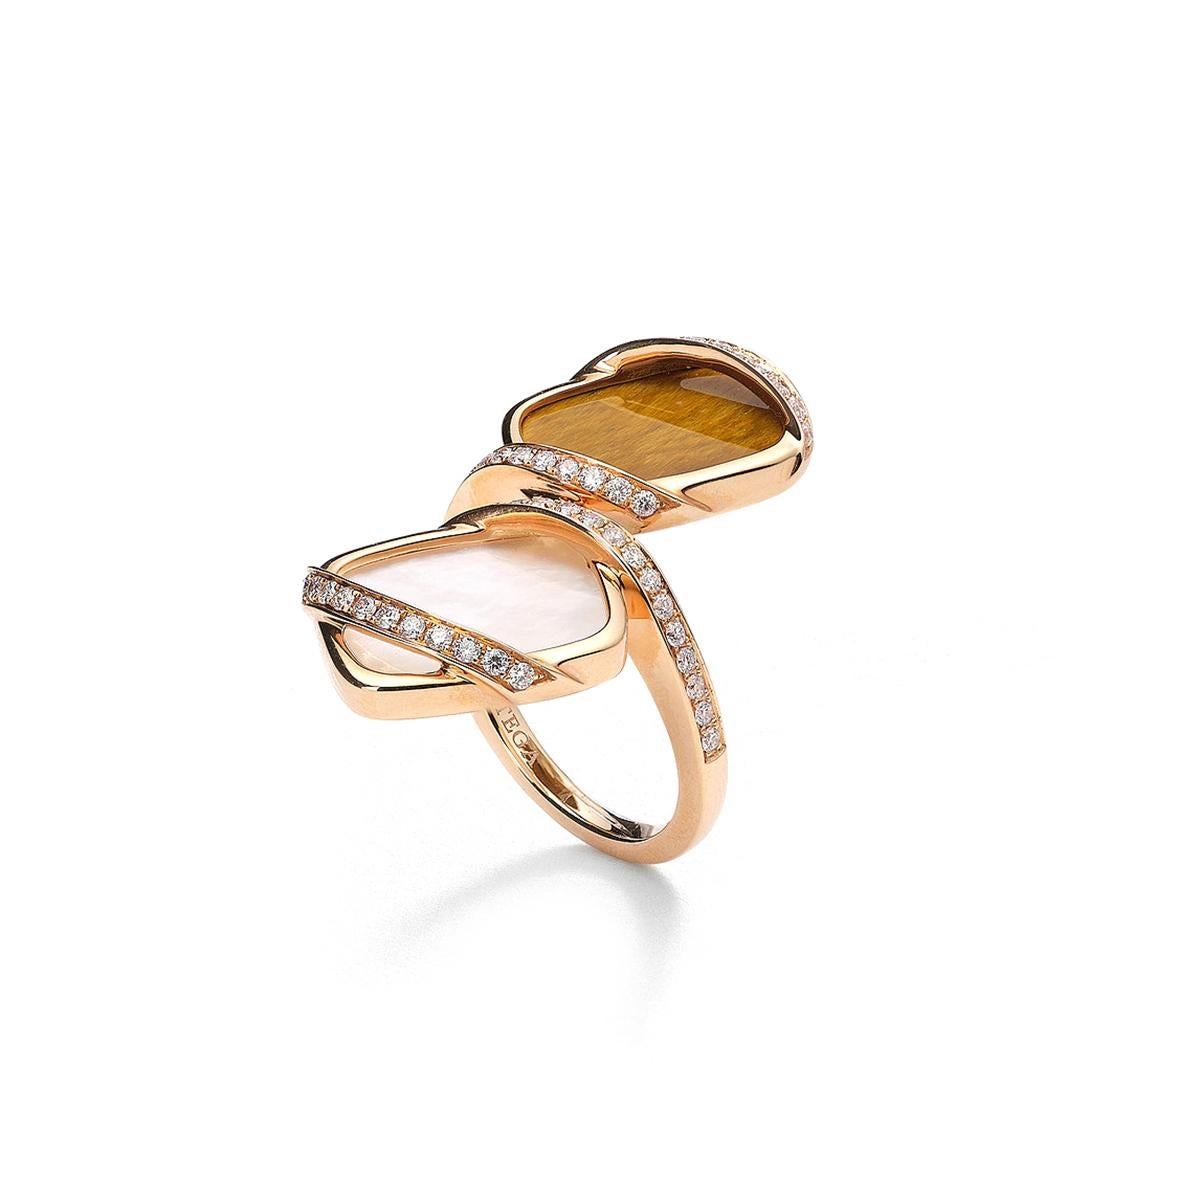 Ring in 18kt pink gold set with 52 diamonds 0.49 cts, one mother of pearl 3.45 cts and one tiger eye 3.42 cts Size 52